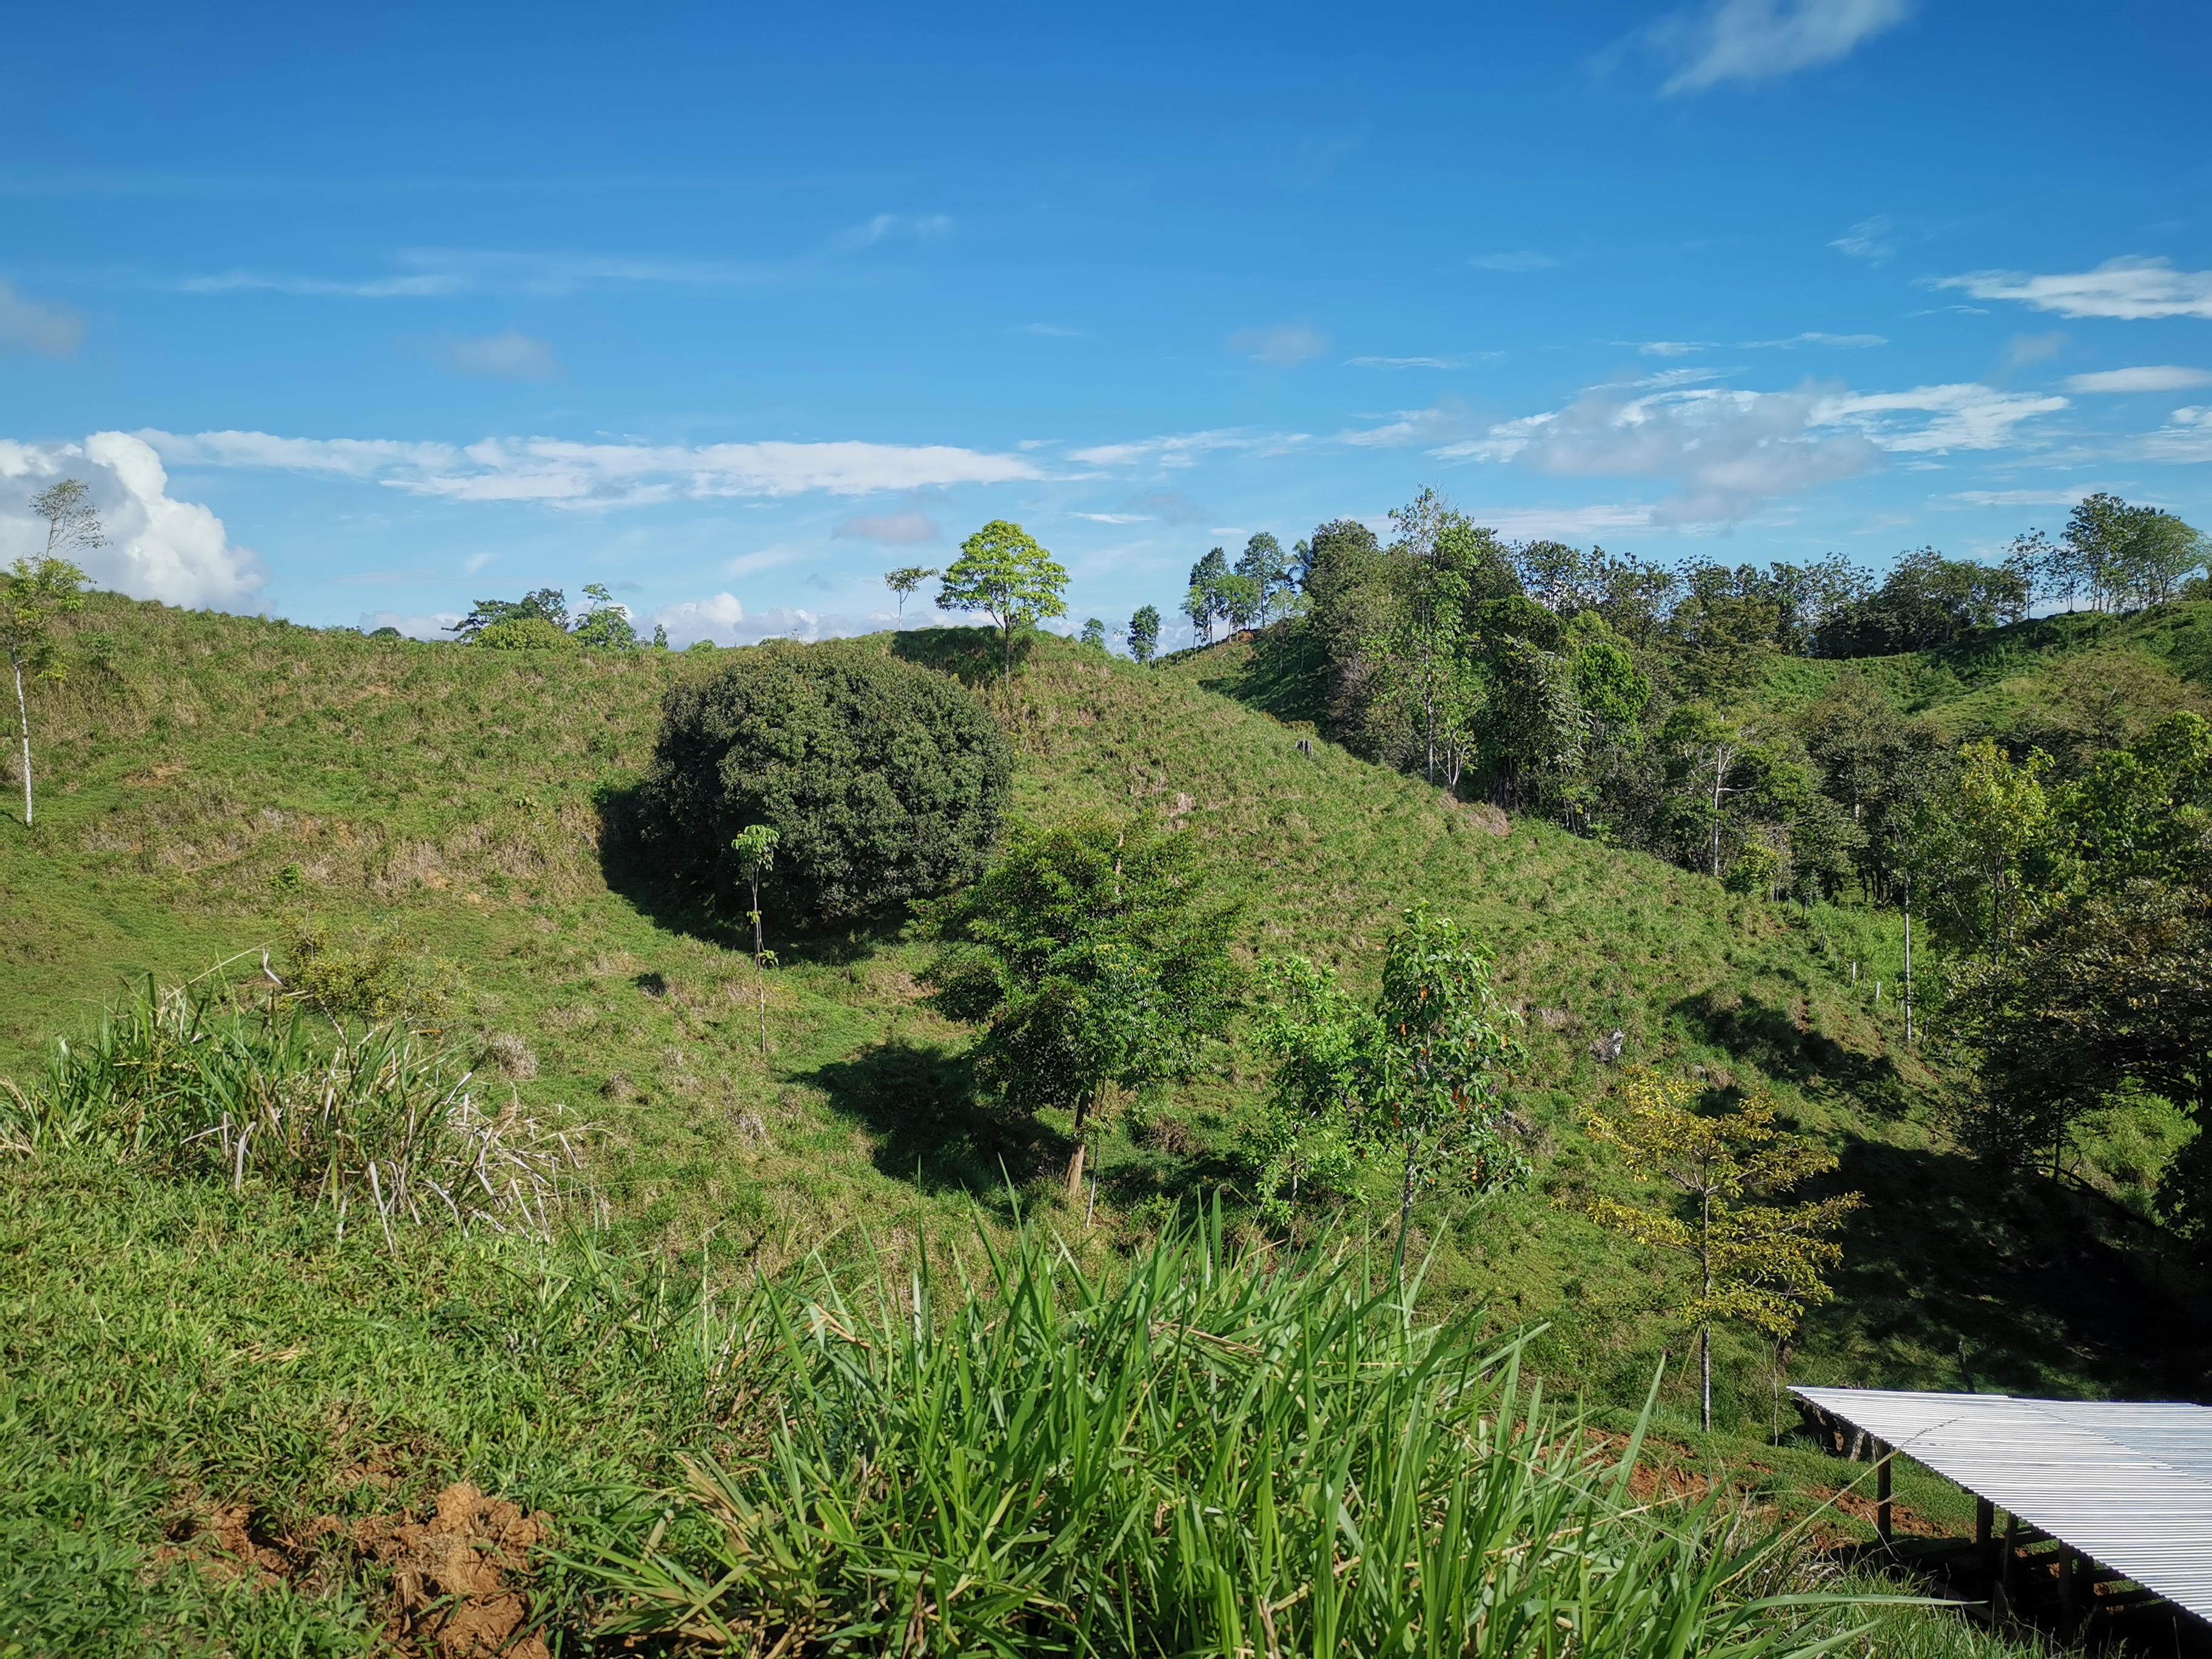 A view of the Pastureland of a productive Farm in the Osa Peninsula close to Corcovado Park